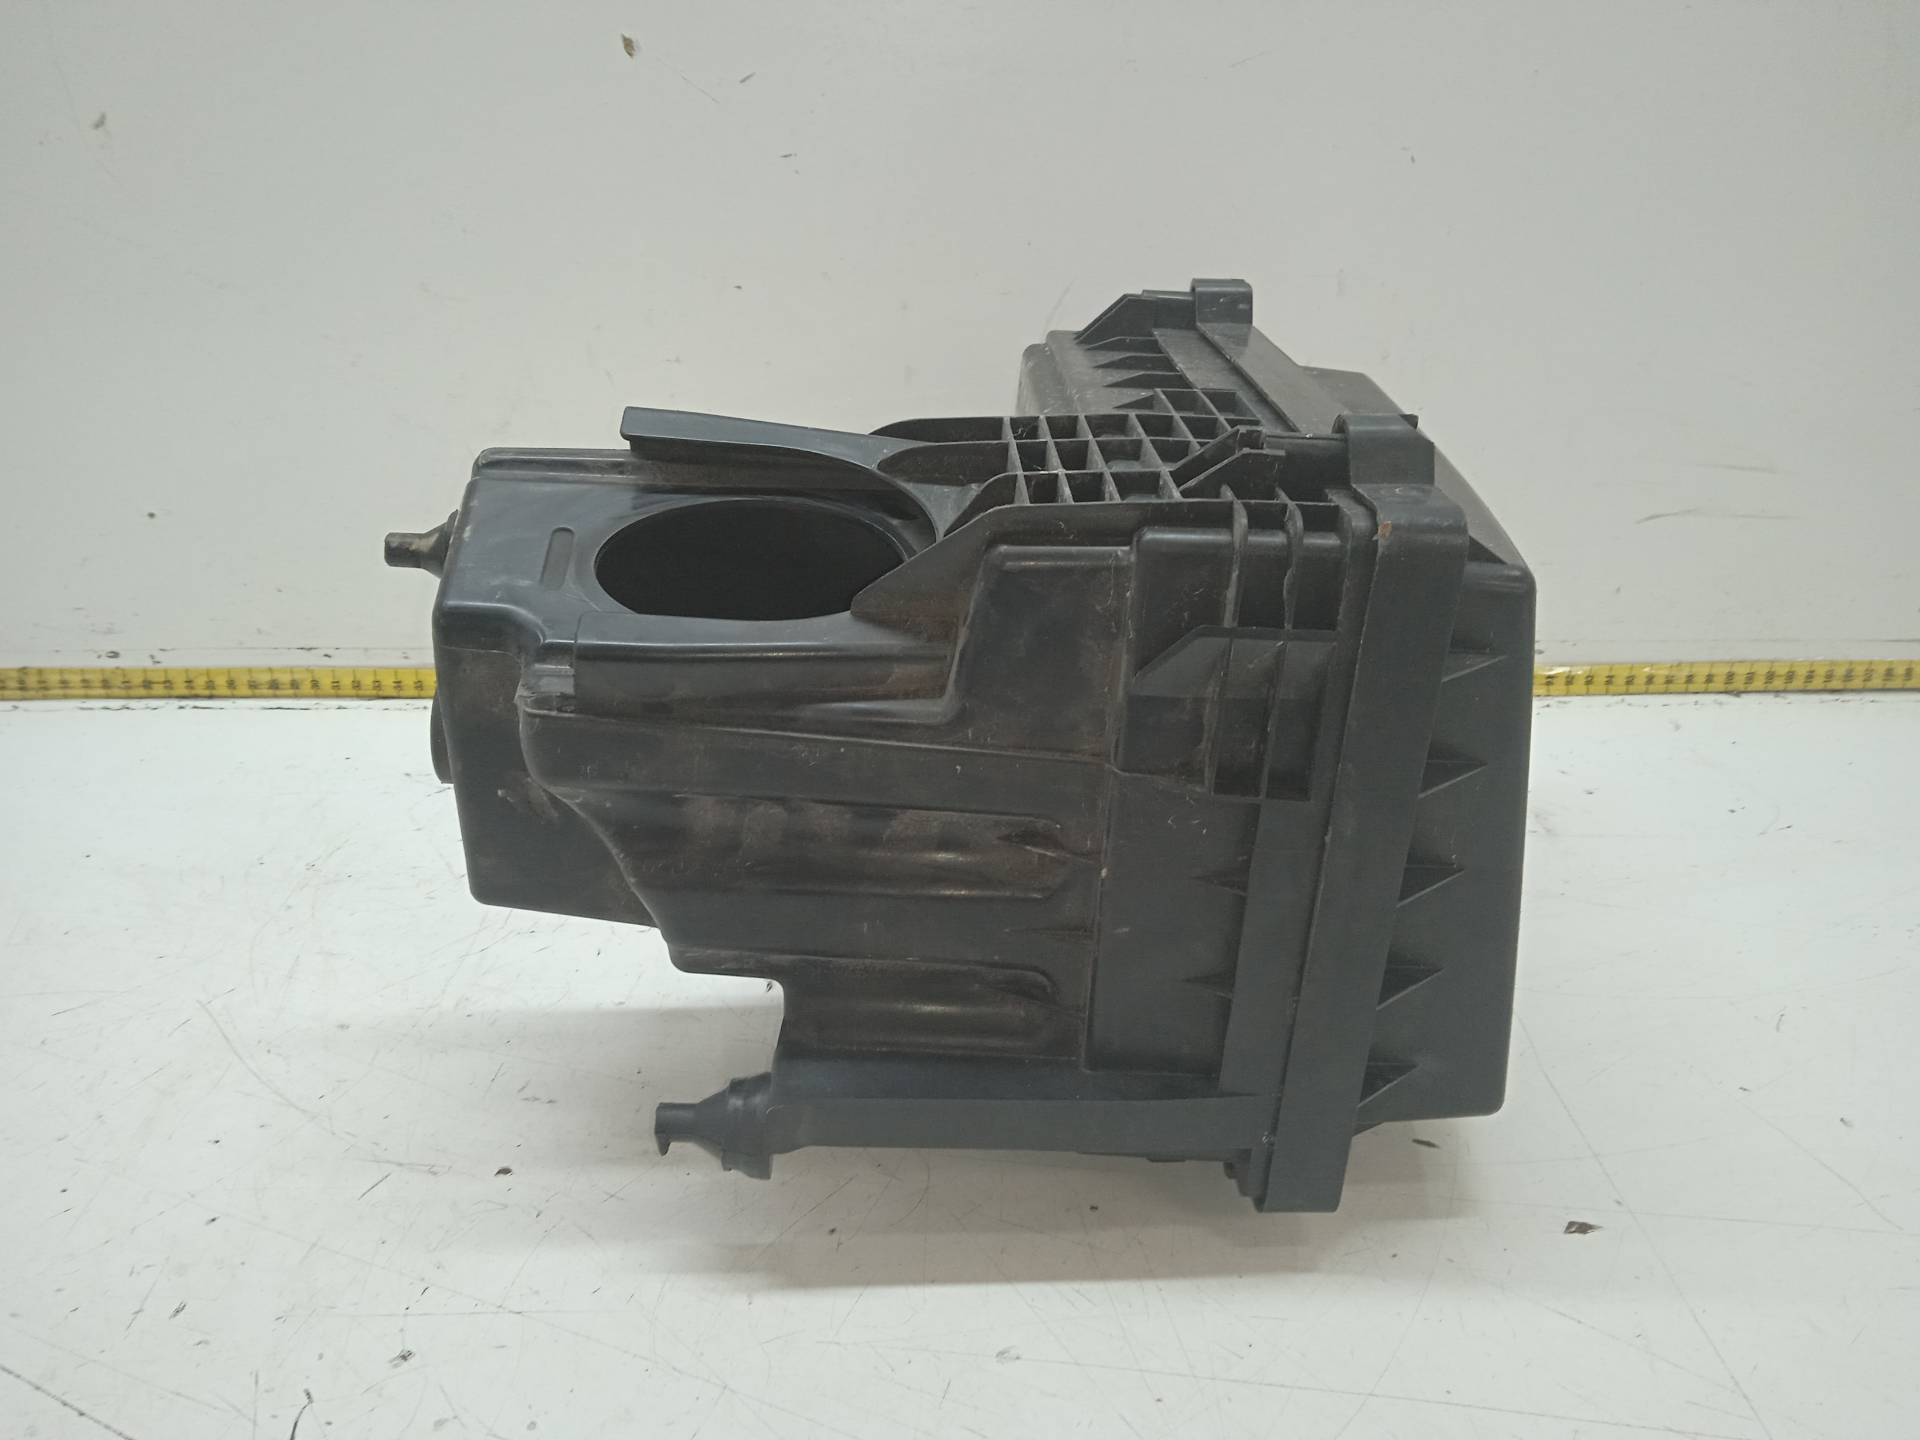 LAND ROVER Freelander 2 generation (2006-2015) Other Engine Compartment Parts 6G929600BF 24330079